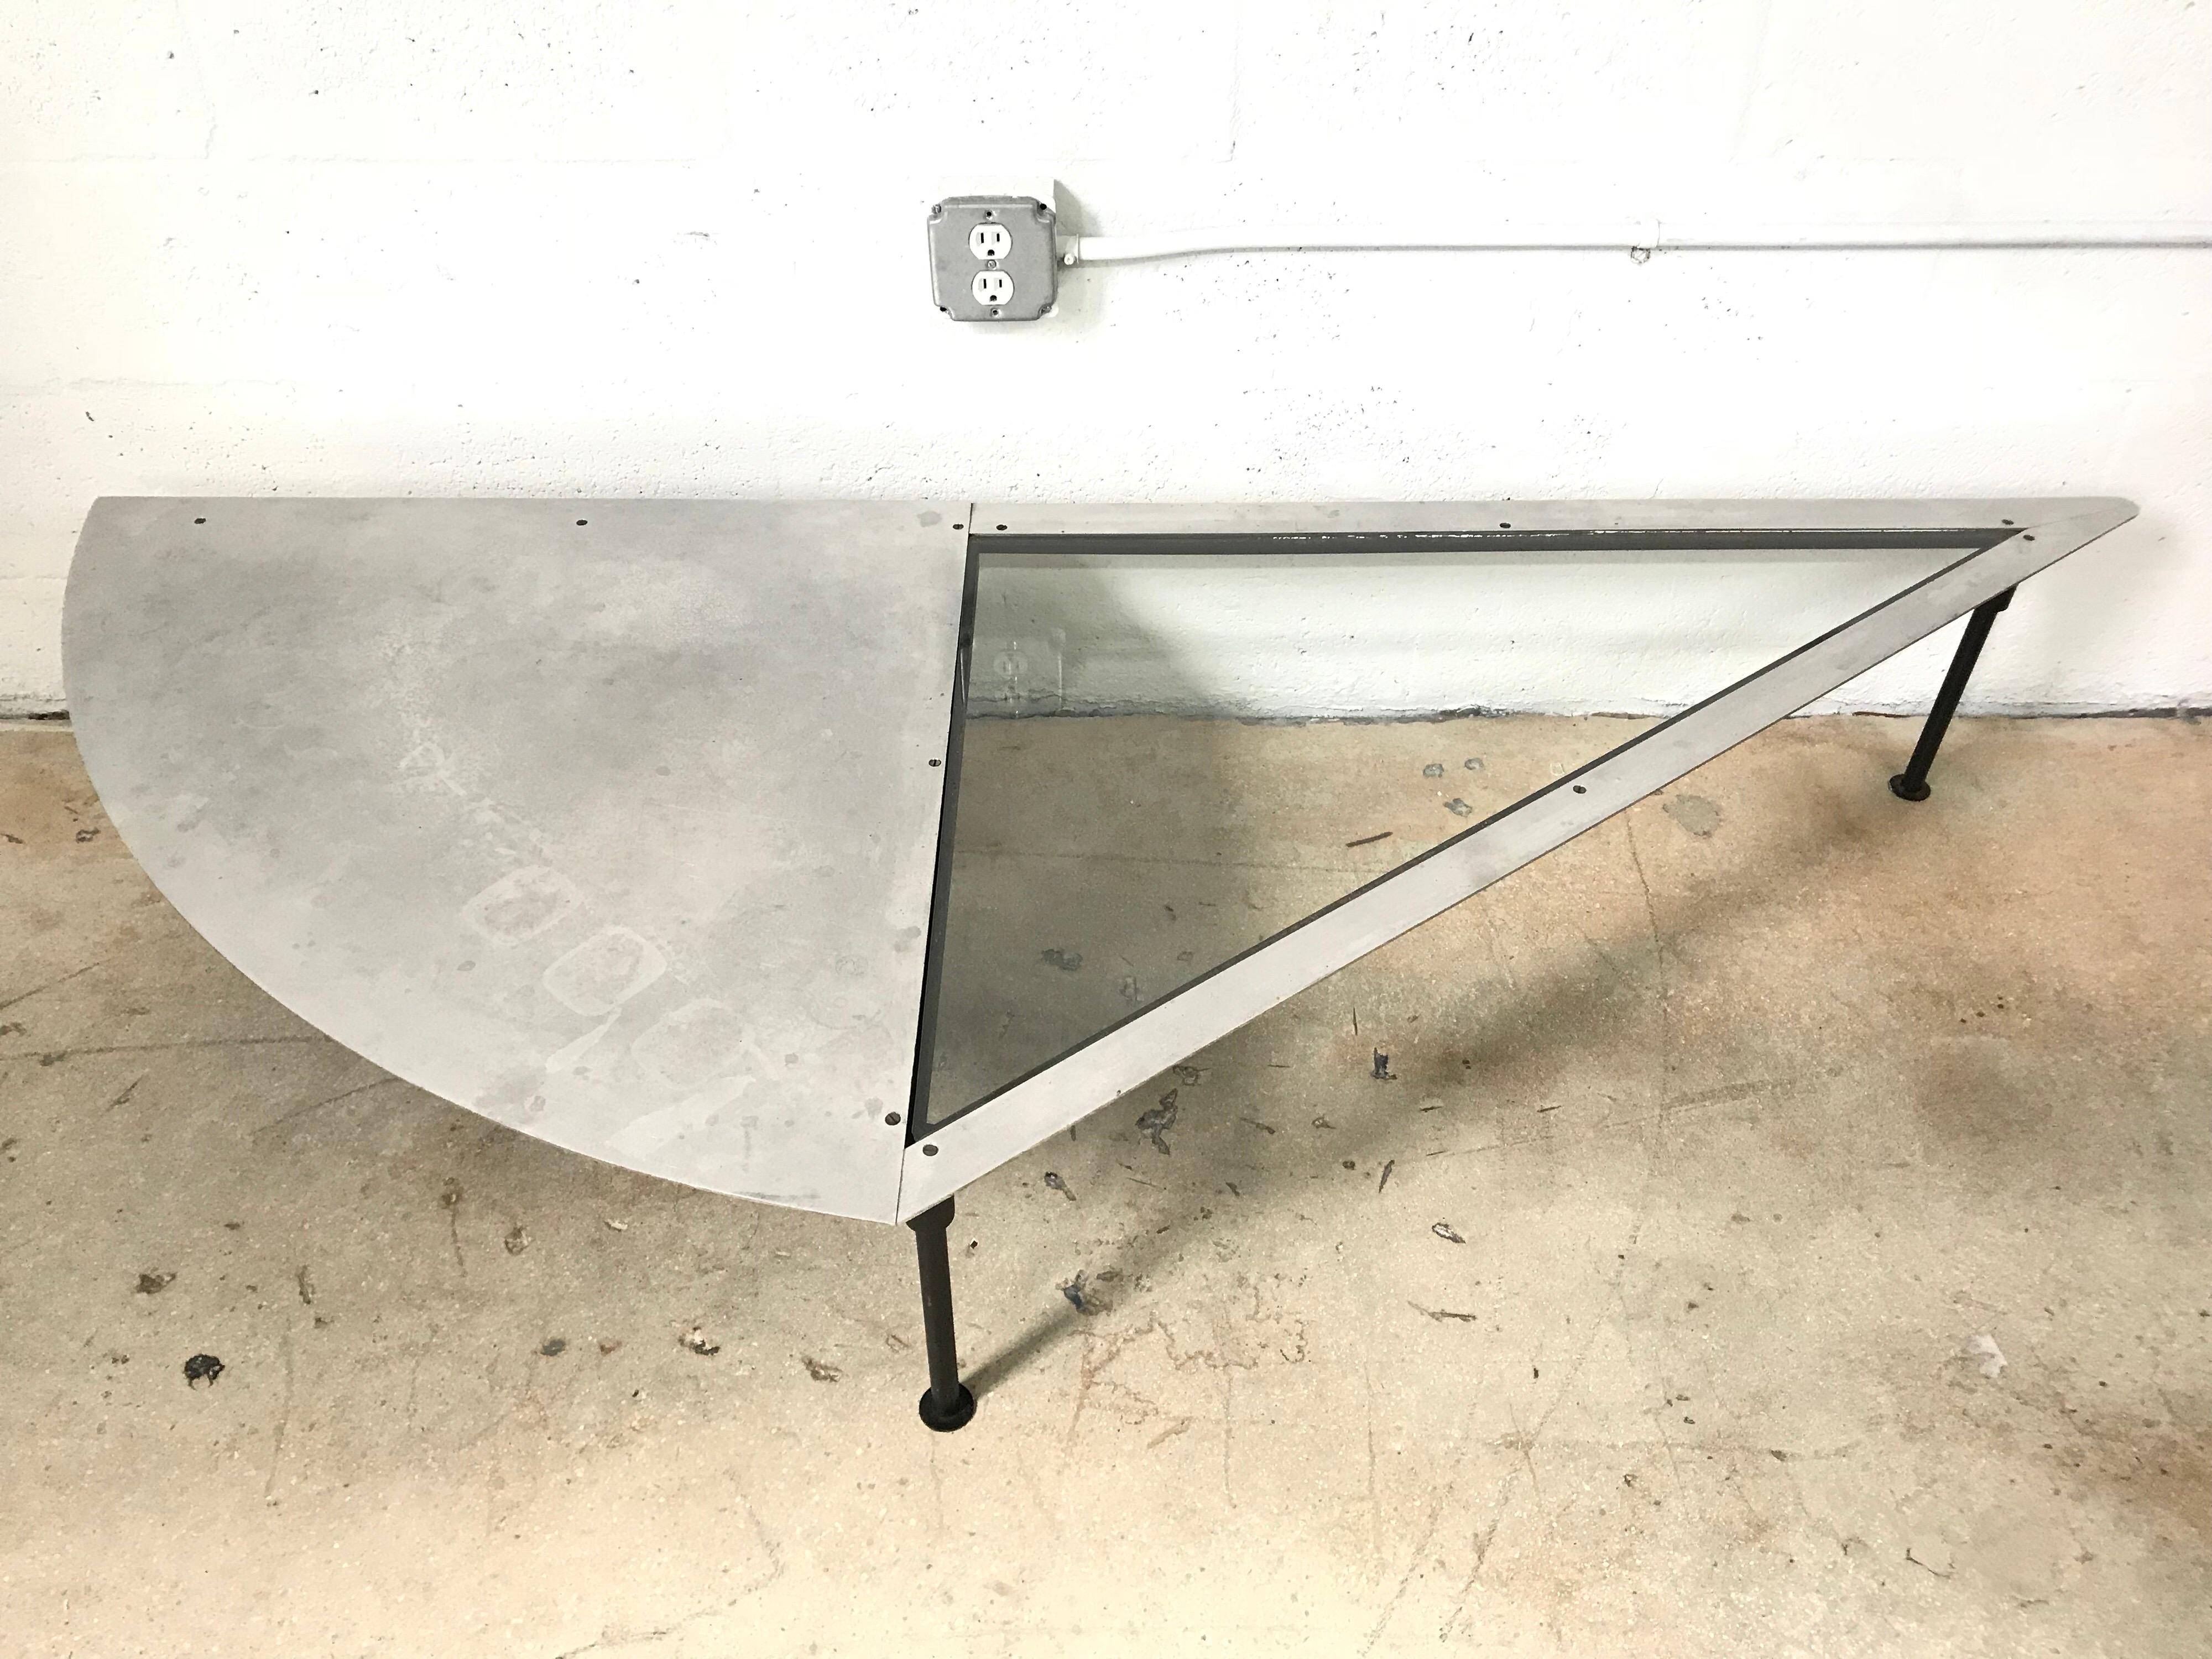 Artist made one of a kind cut steel and glass sculptural coffee or cocktail table.